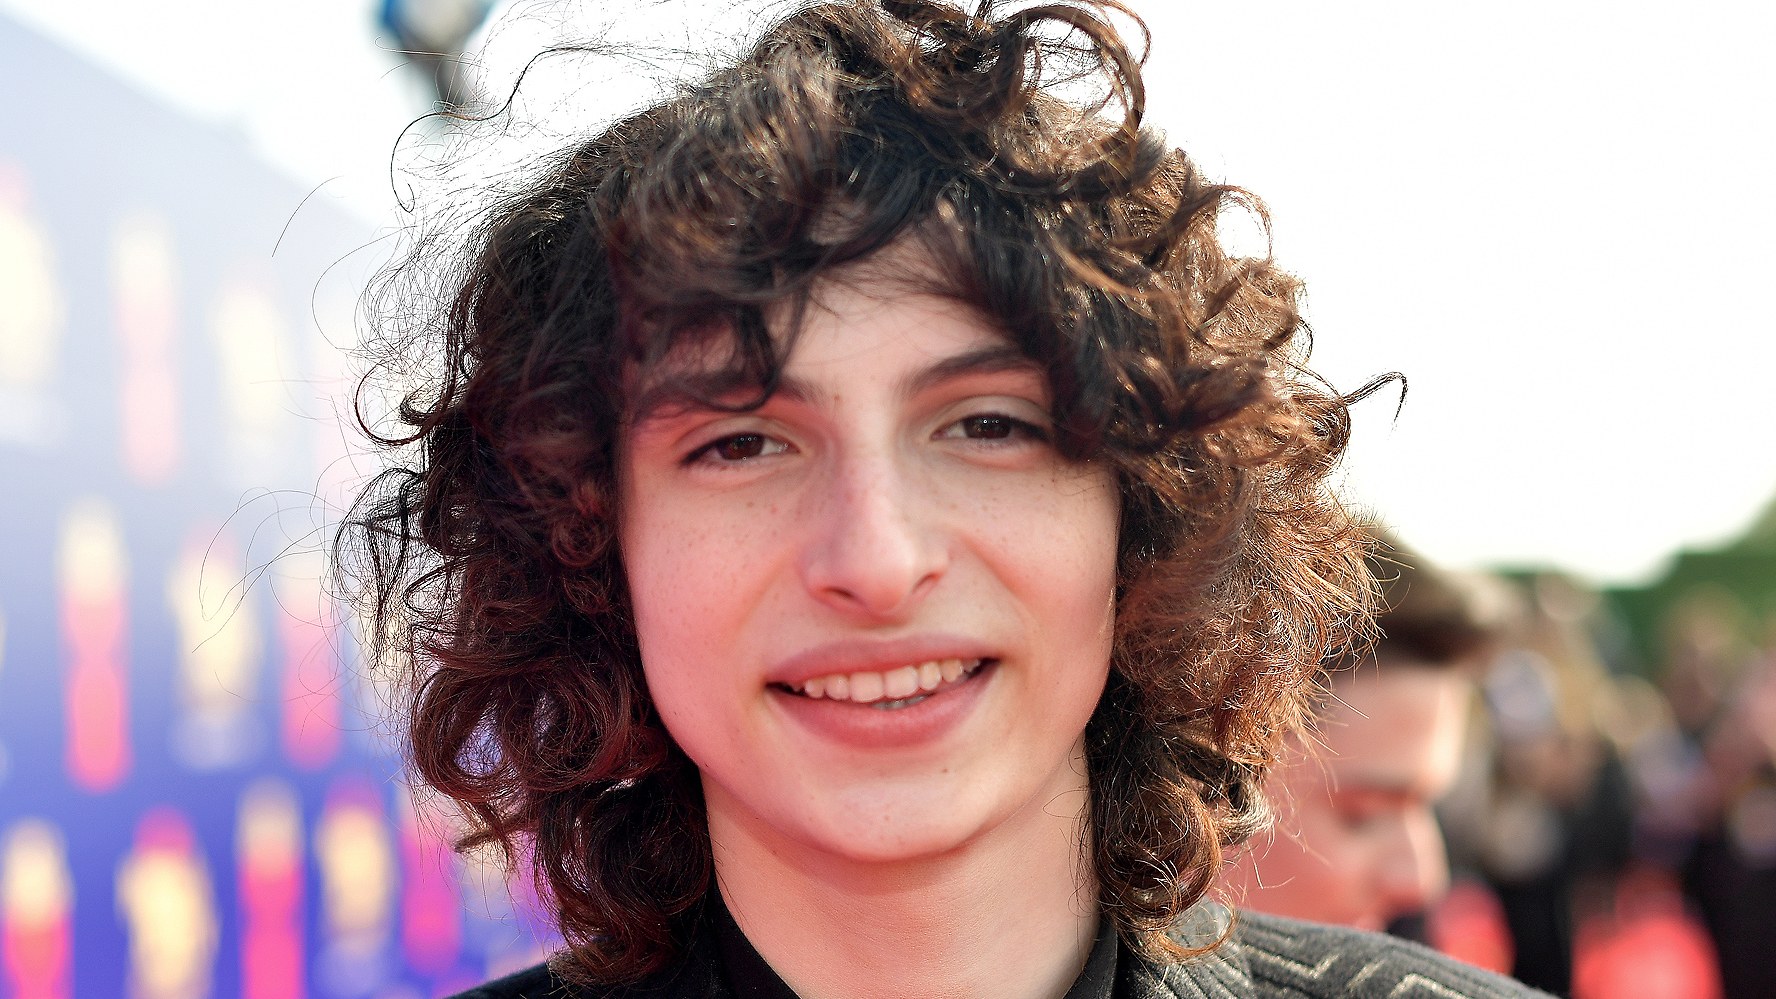 Finn wolfhard with a mullet